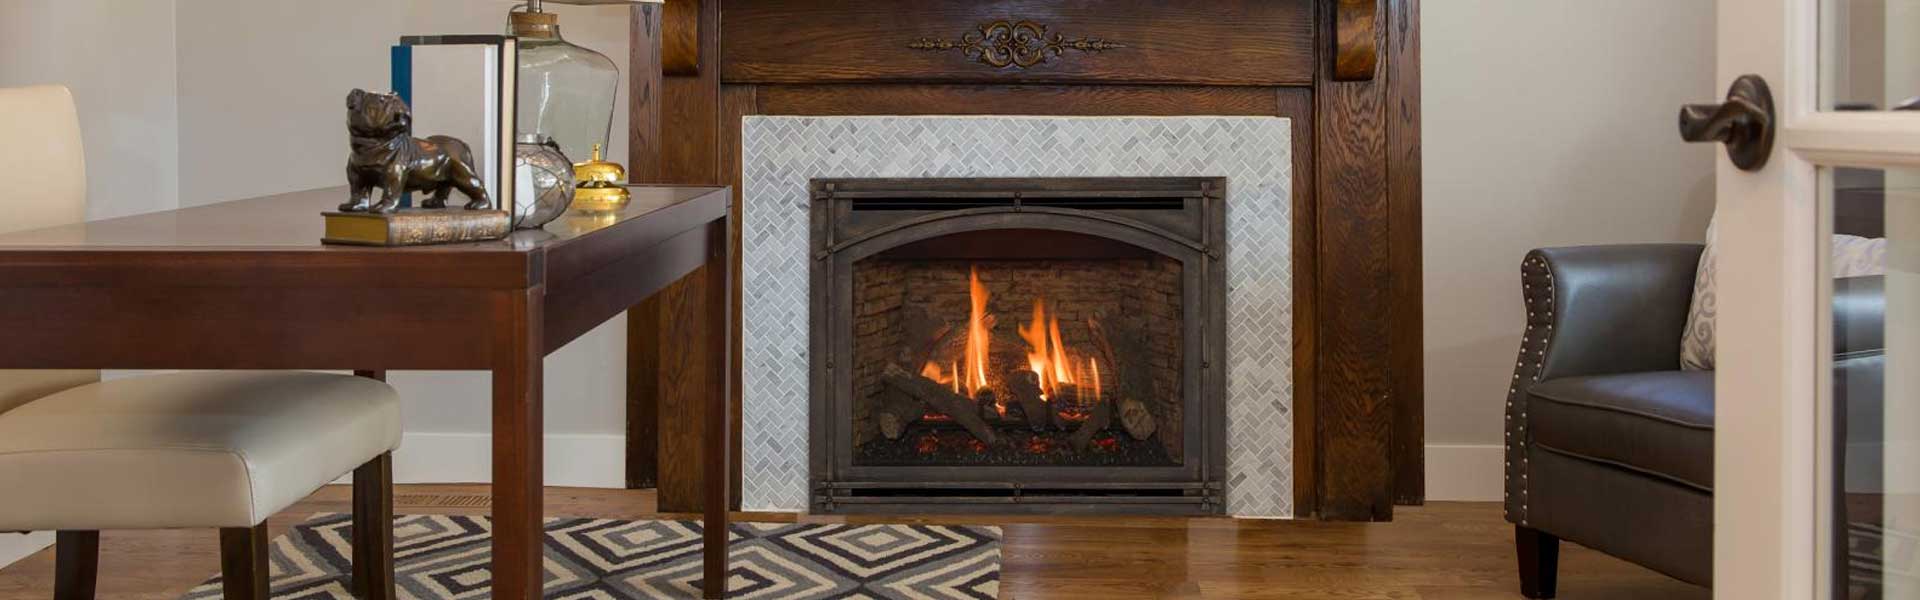 Why Choose a Gas Insert Over a Gas Log Set?